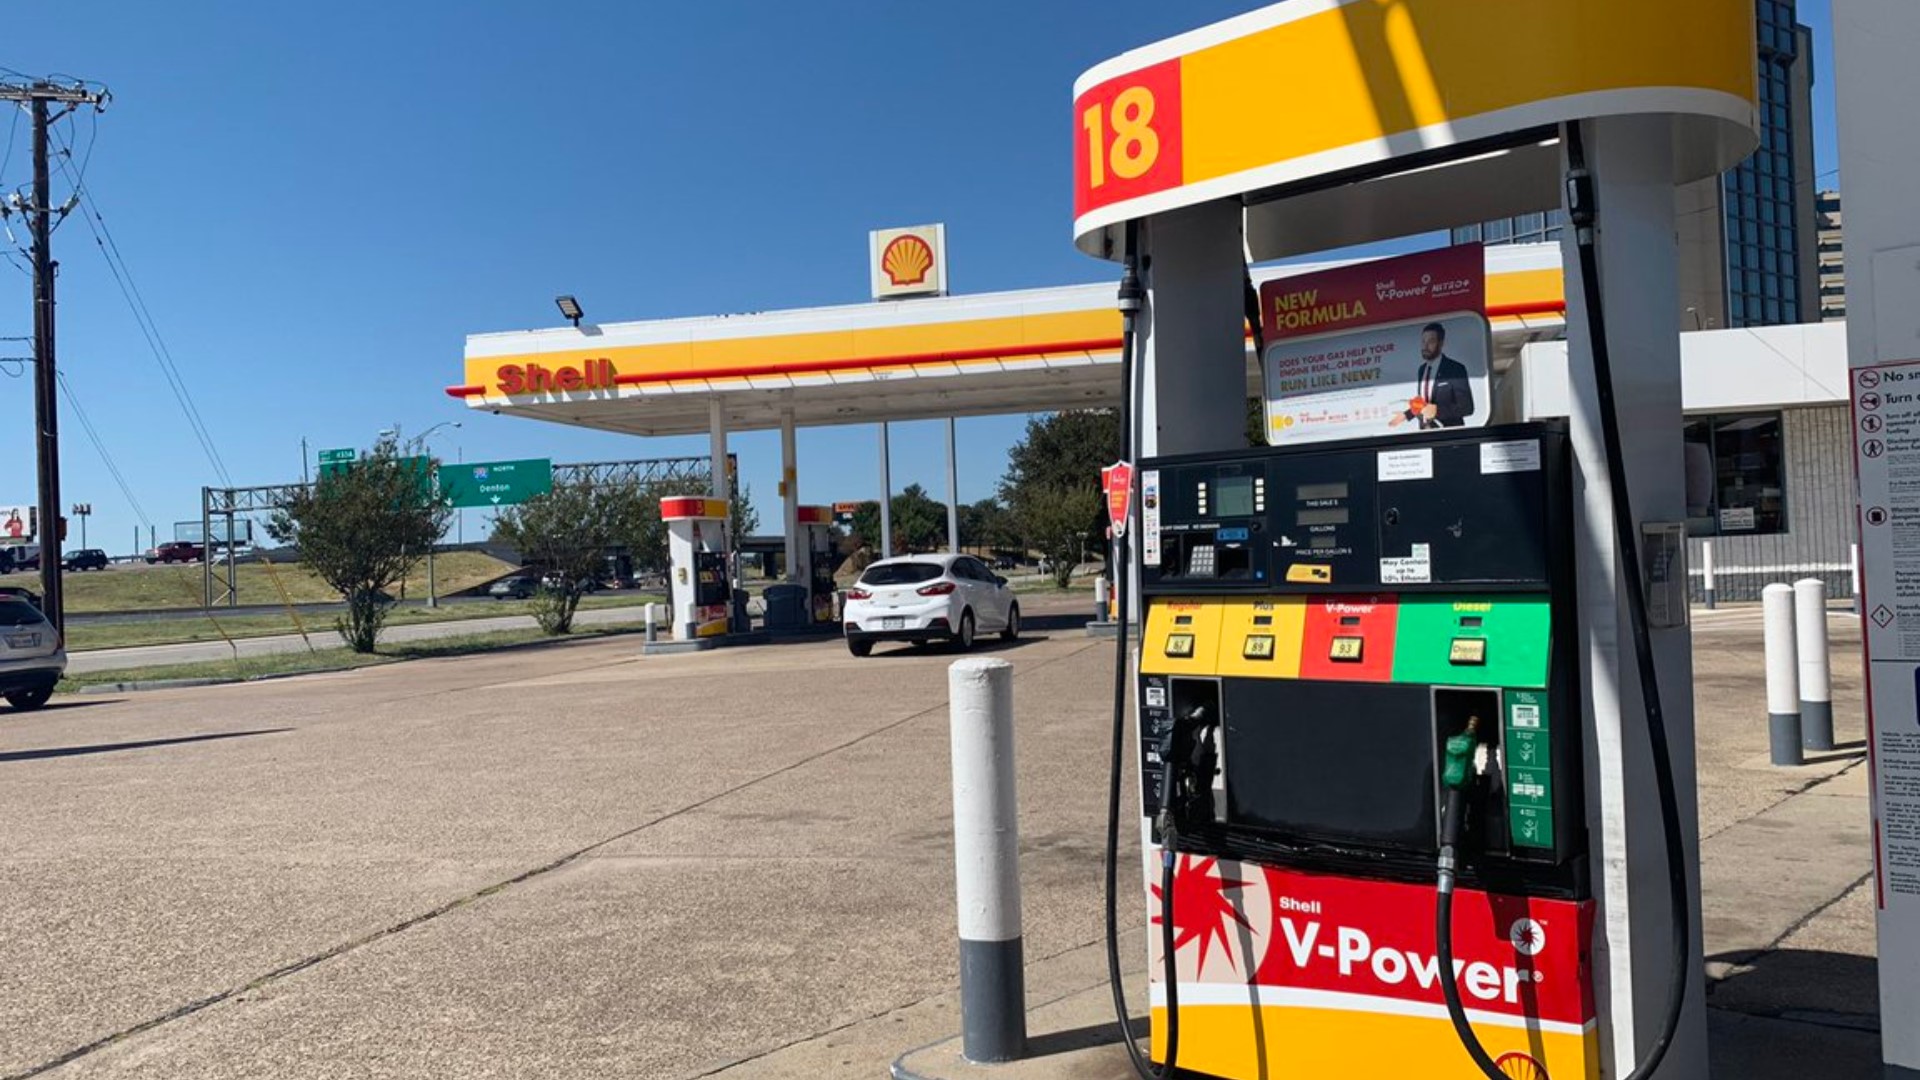 Dallas police say the suspects went inside and asked for $5 worth of gas and then pried open the front panel of the pump and disabled the manual shut off switch.